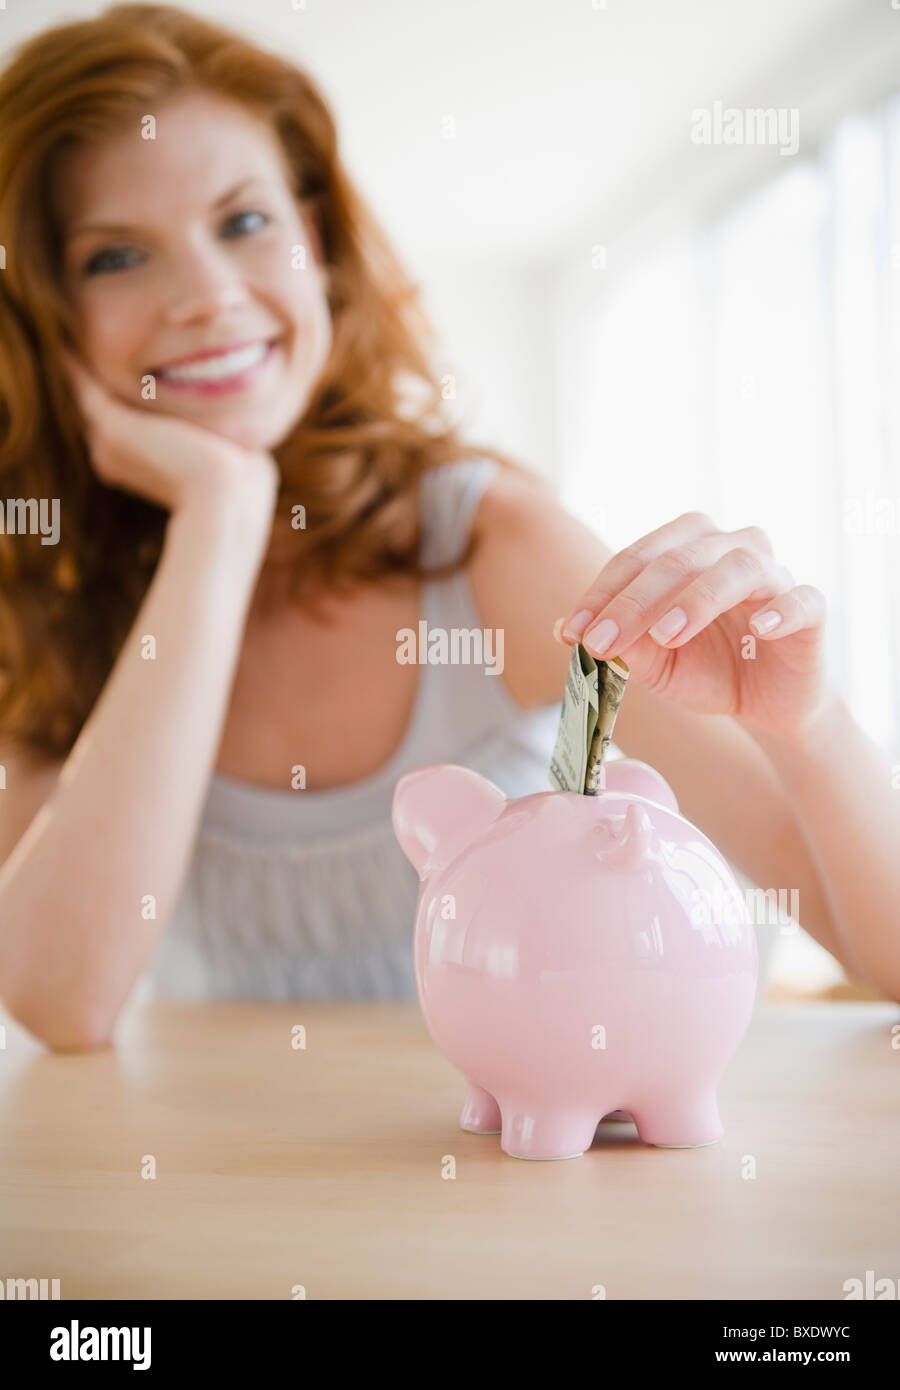 Woman putting money in piggy bank Banque D'Images